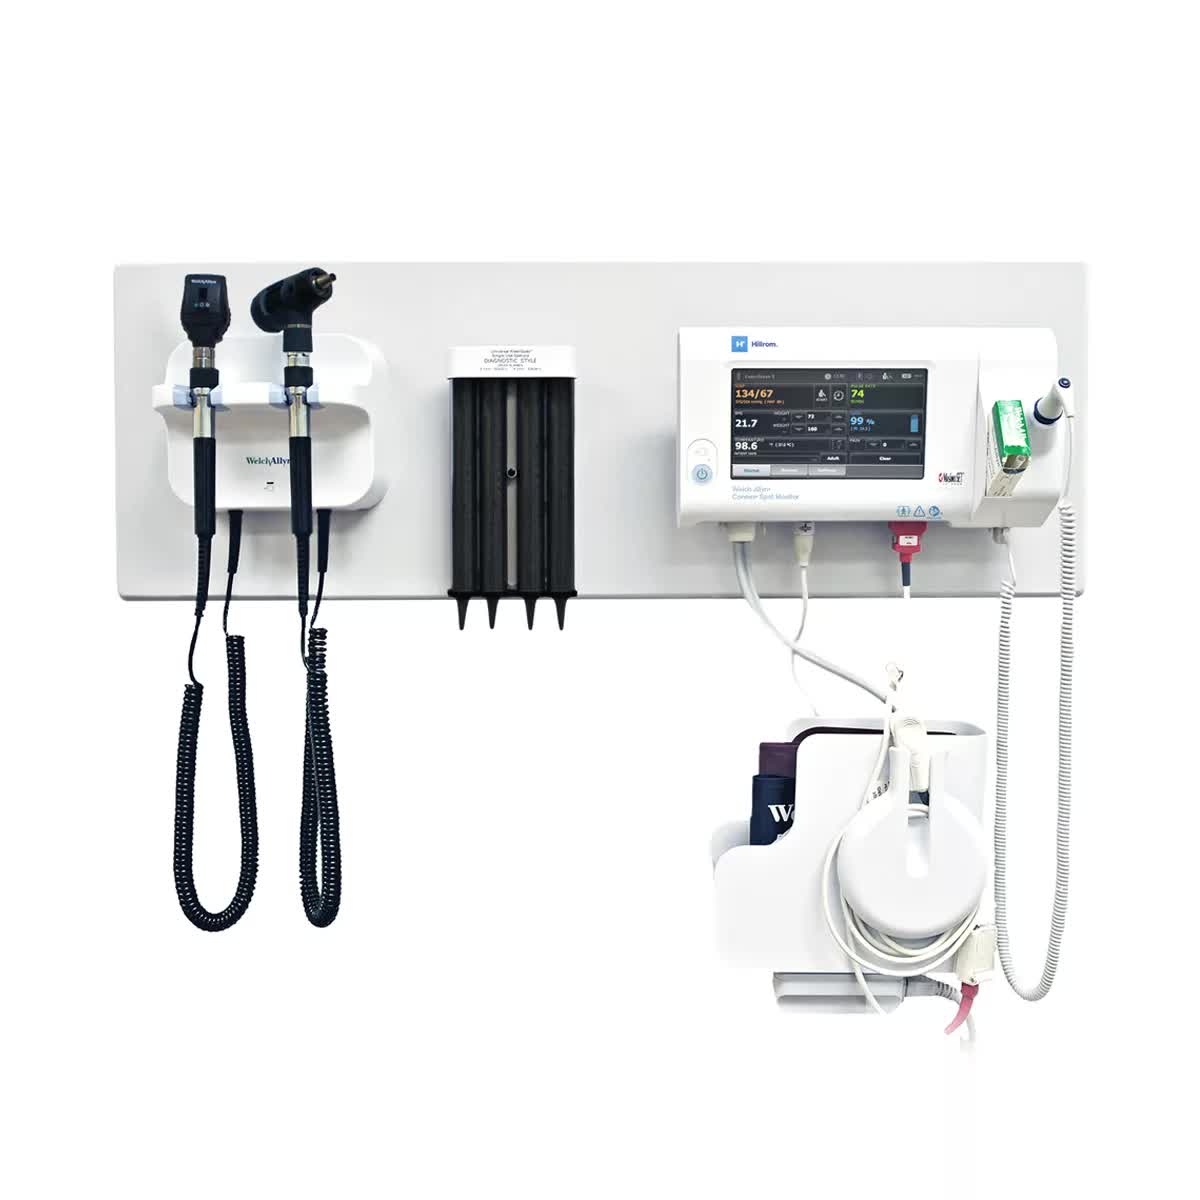 Welch Allyn Connex 7300 Bluetooth Connectivity Spot Monitor with Masimo SpO2 and SureTemp Plus